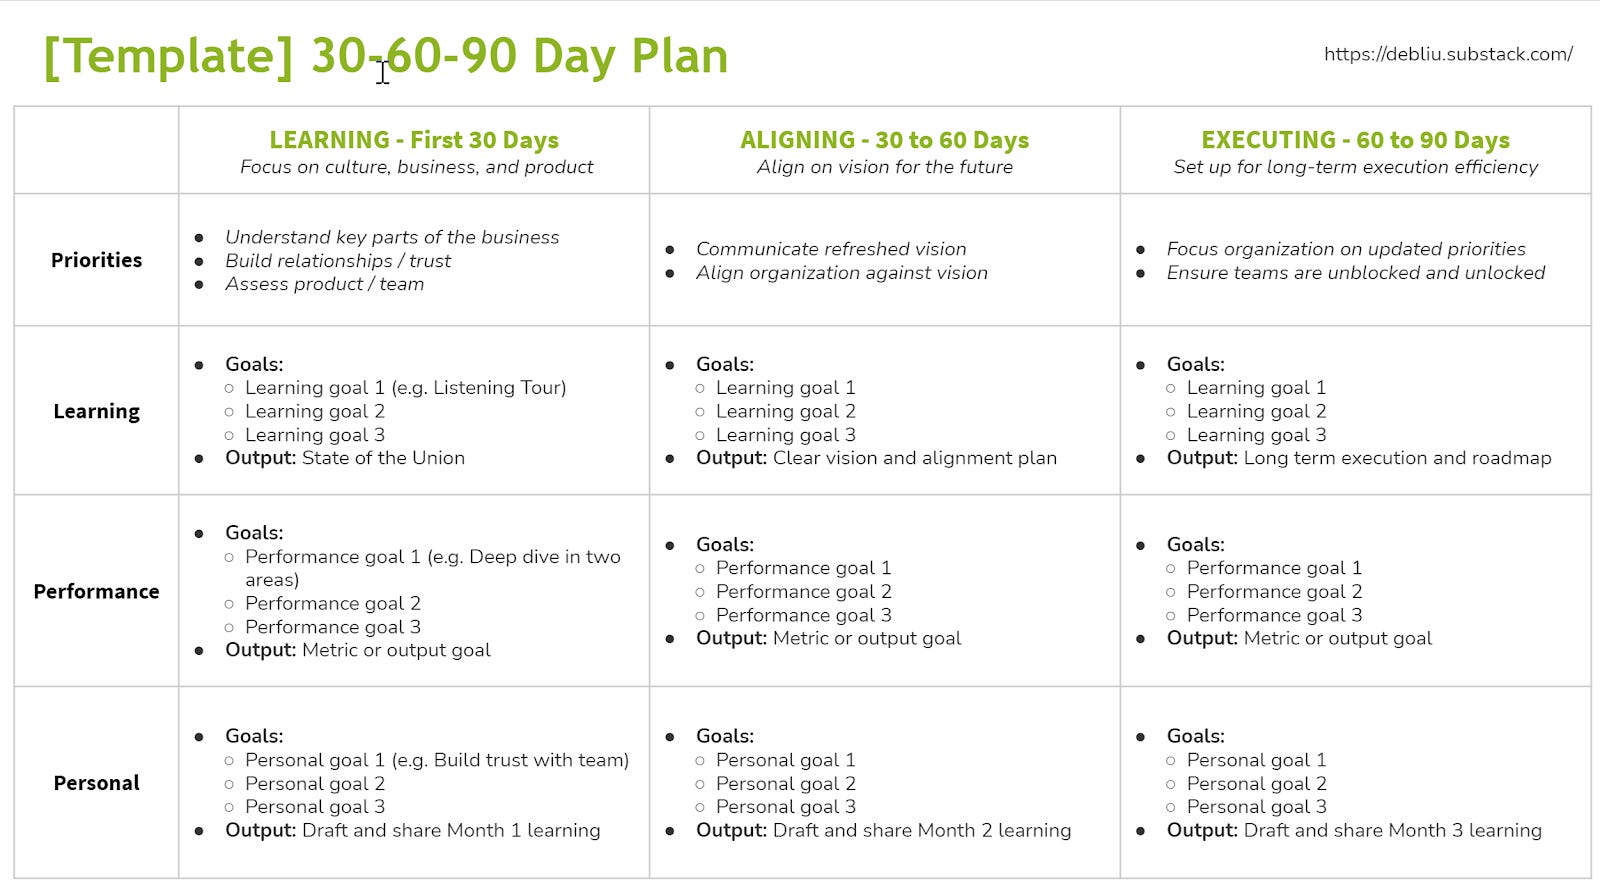 example 30 60 90 day plan